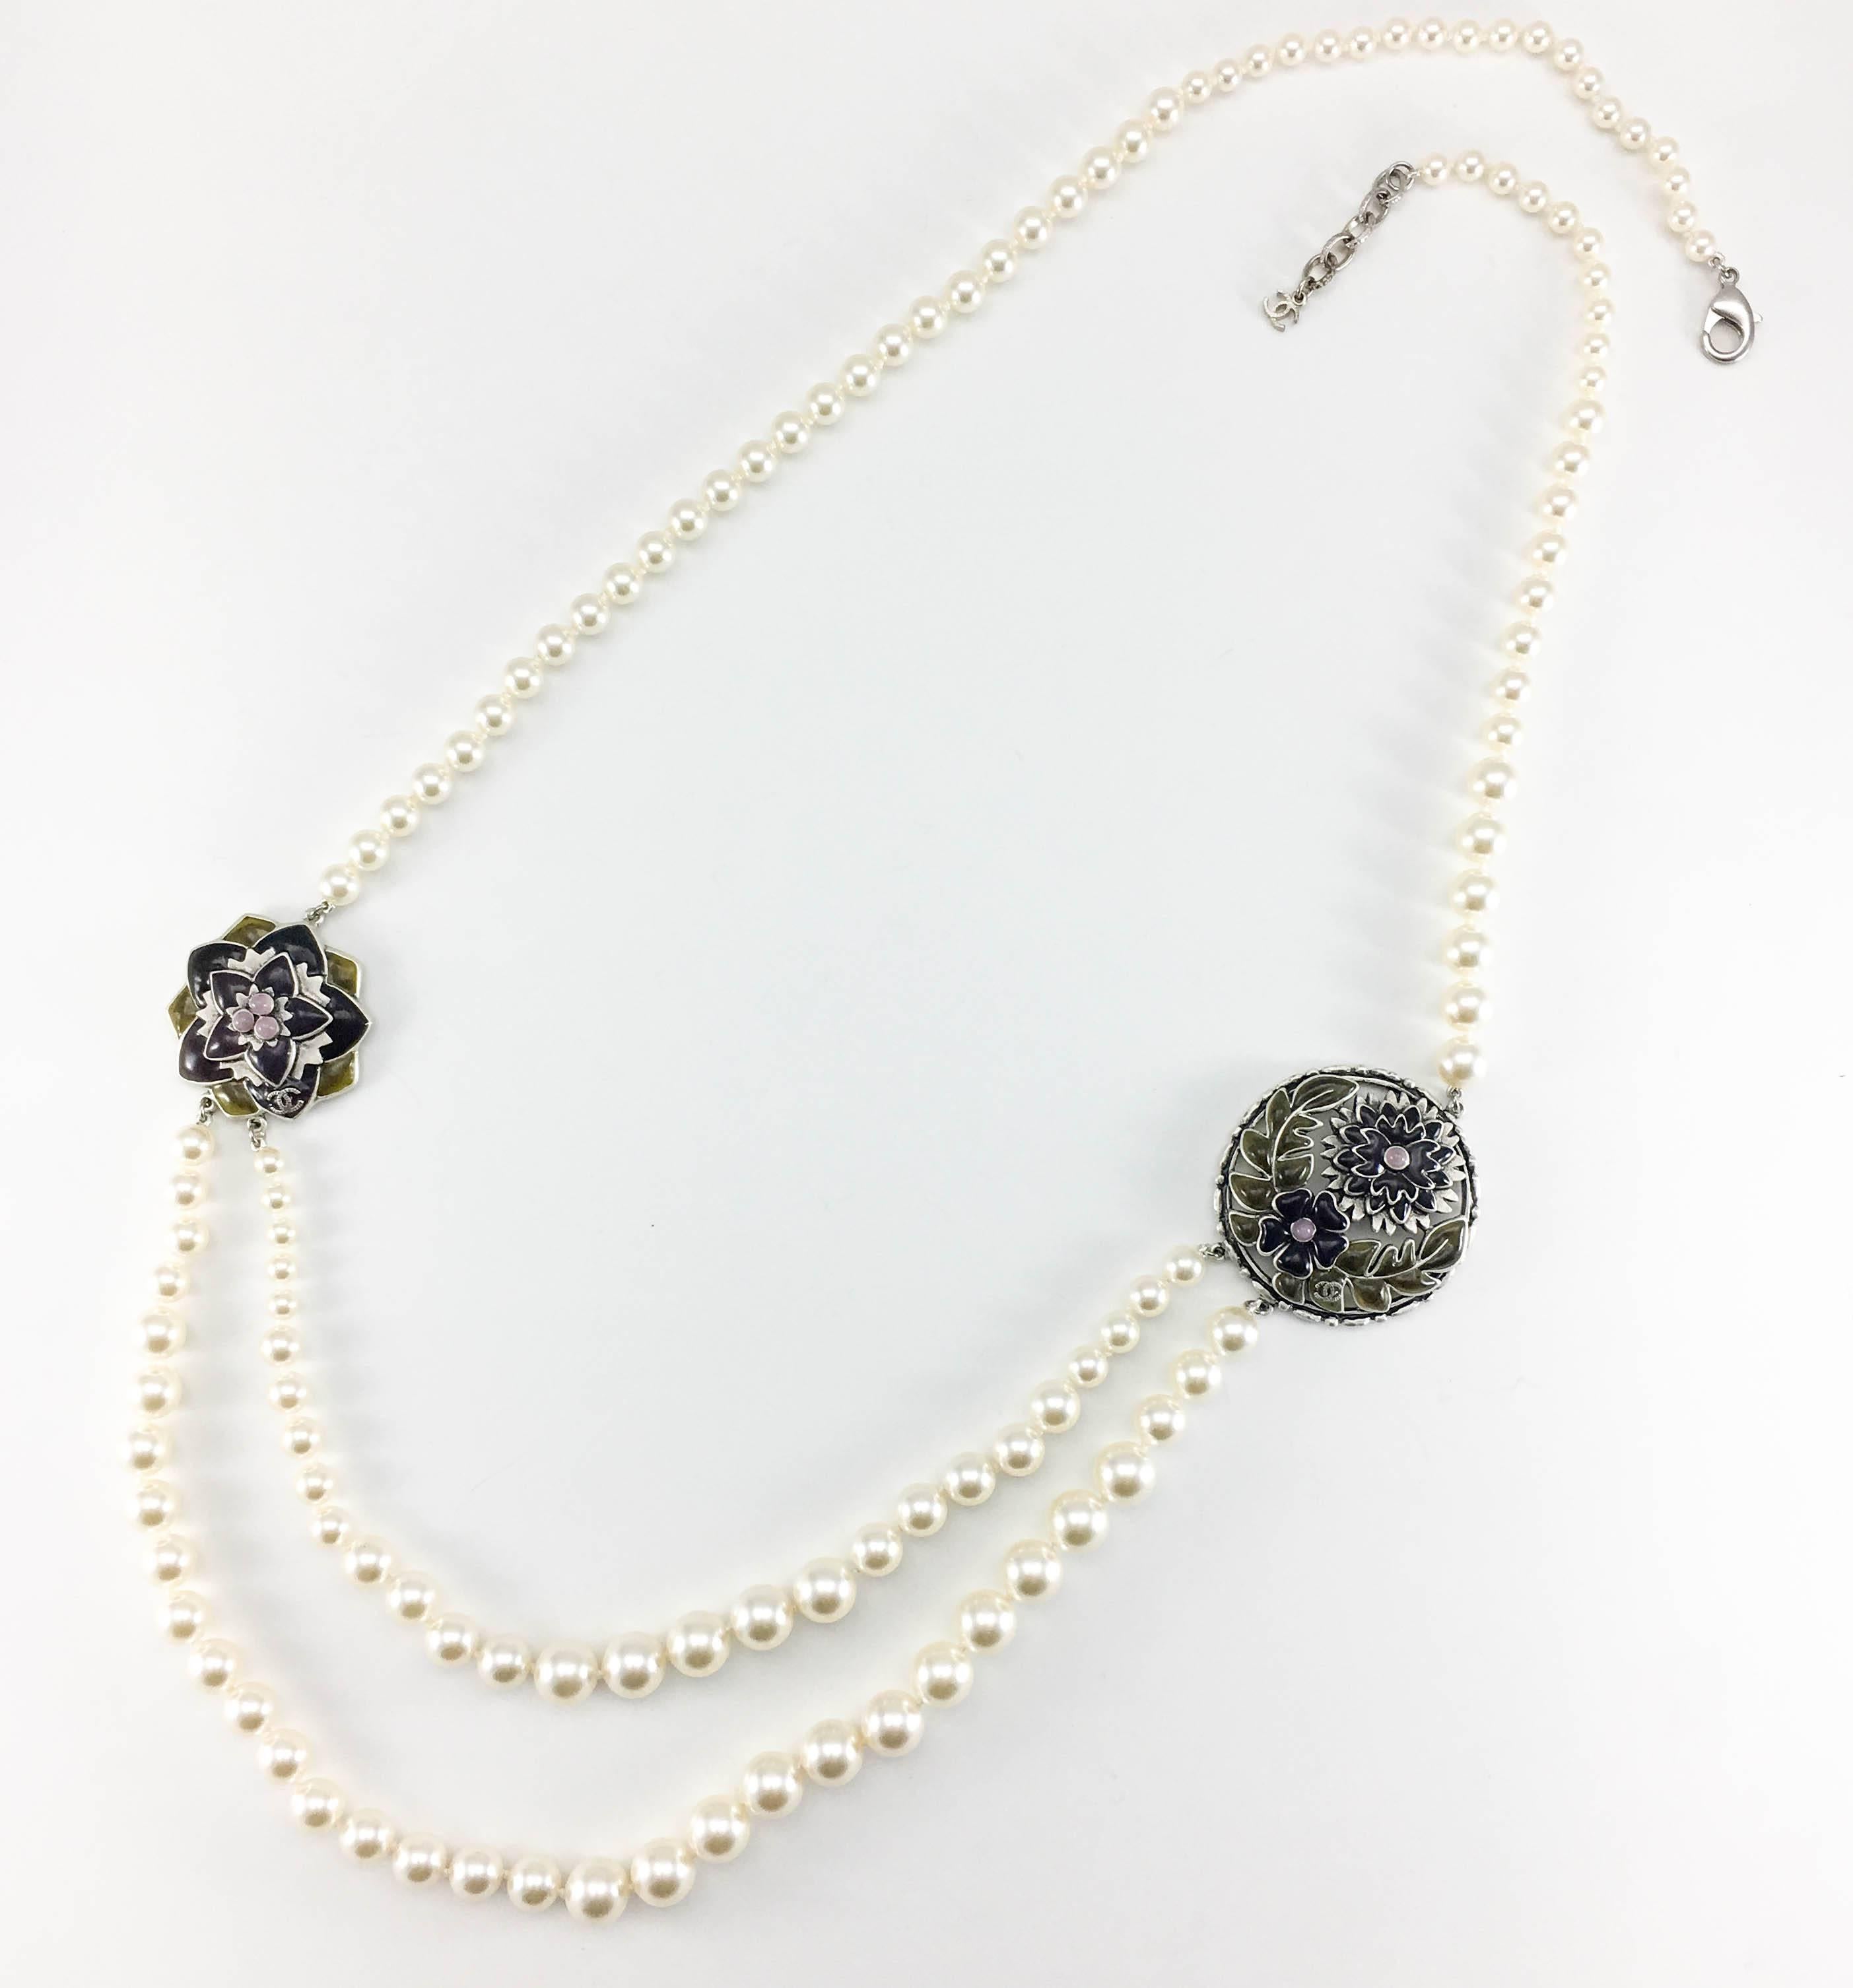 2015 Chanel Long Faux Pearl and Gripoix Sautoir Necklace In Excellent Condition In London, Chelsea